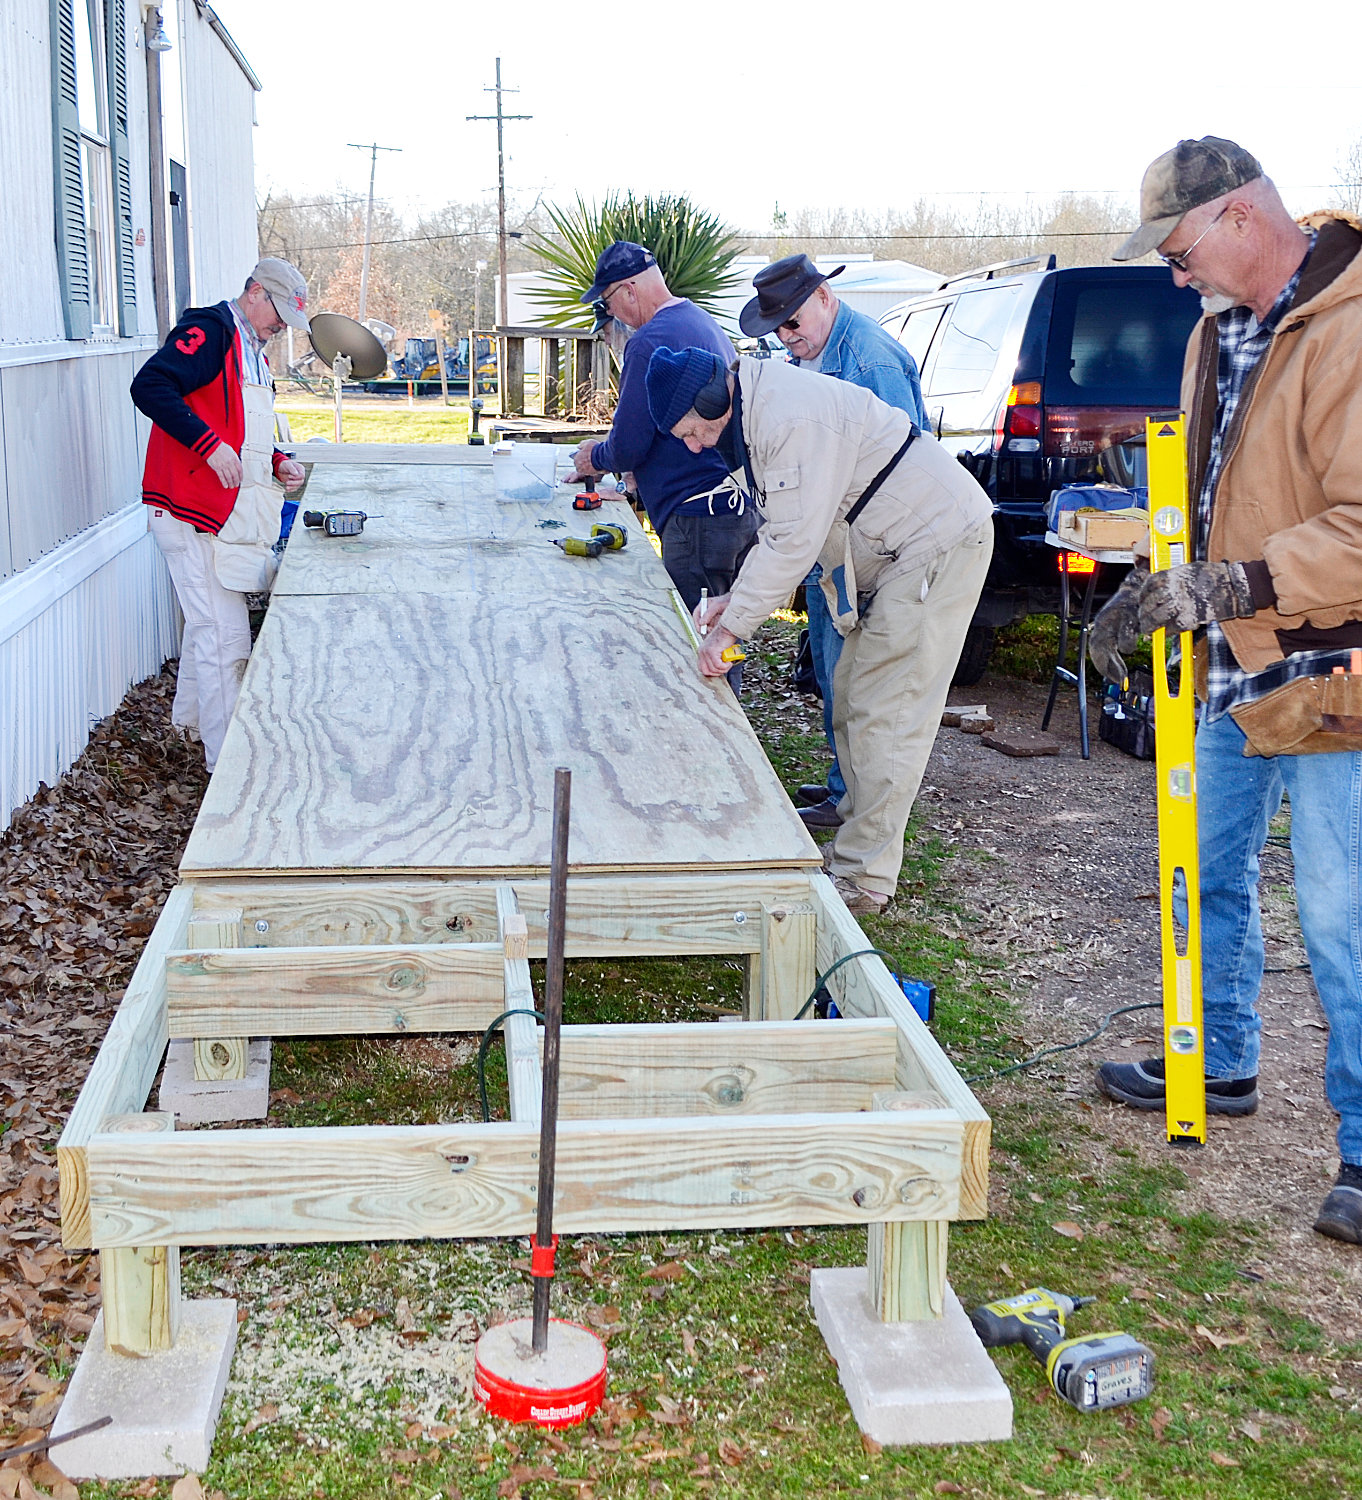 Members of the Broad Street Church of Christ in Mineola construct a wheelchair ramp for a Mineola resident last week. The team completed its 100th ramp this week in Yantis.